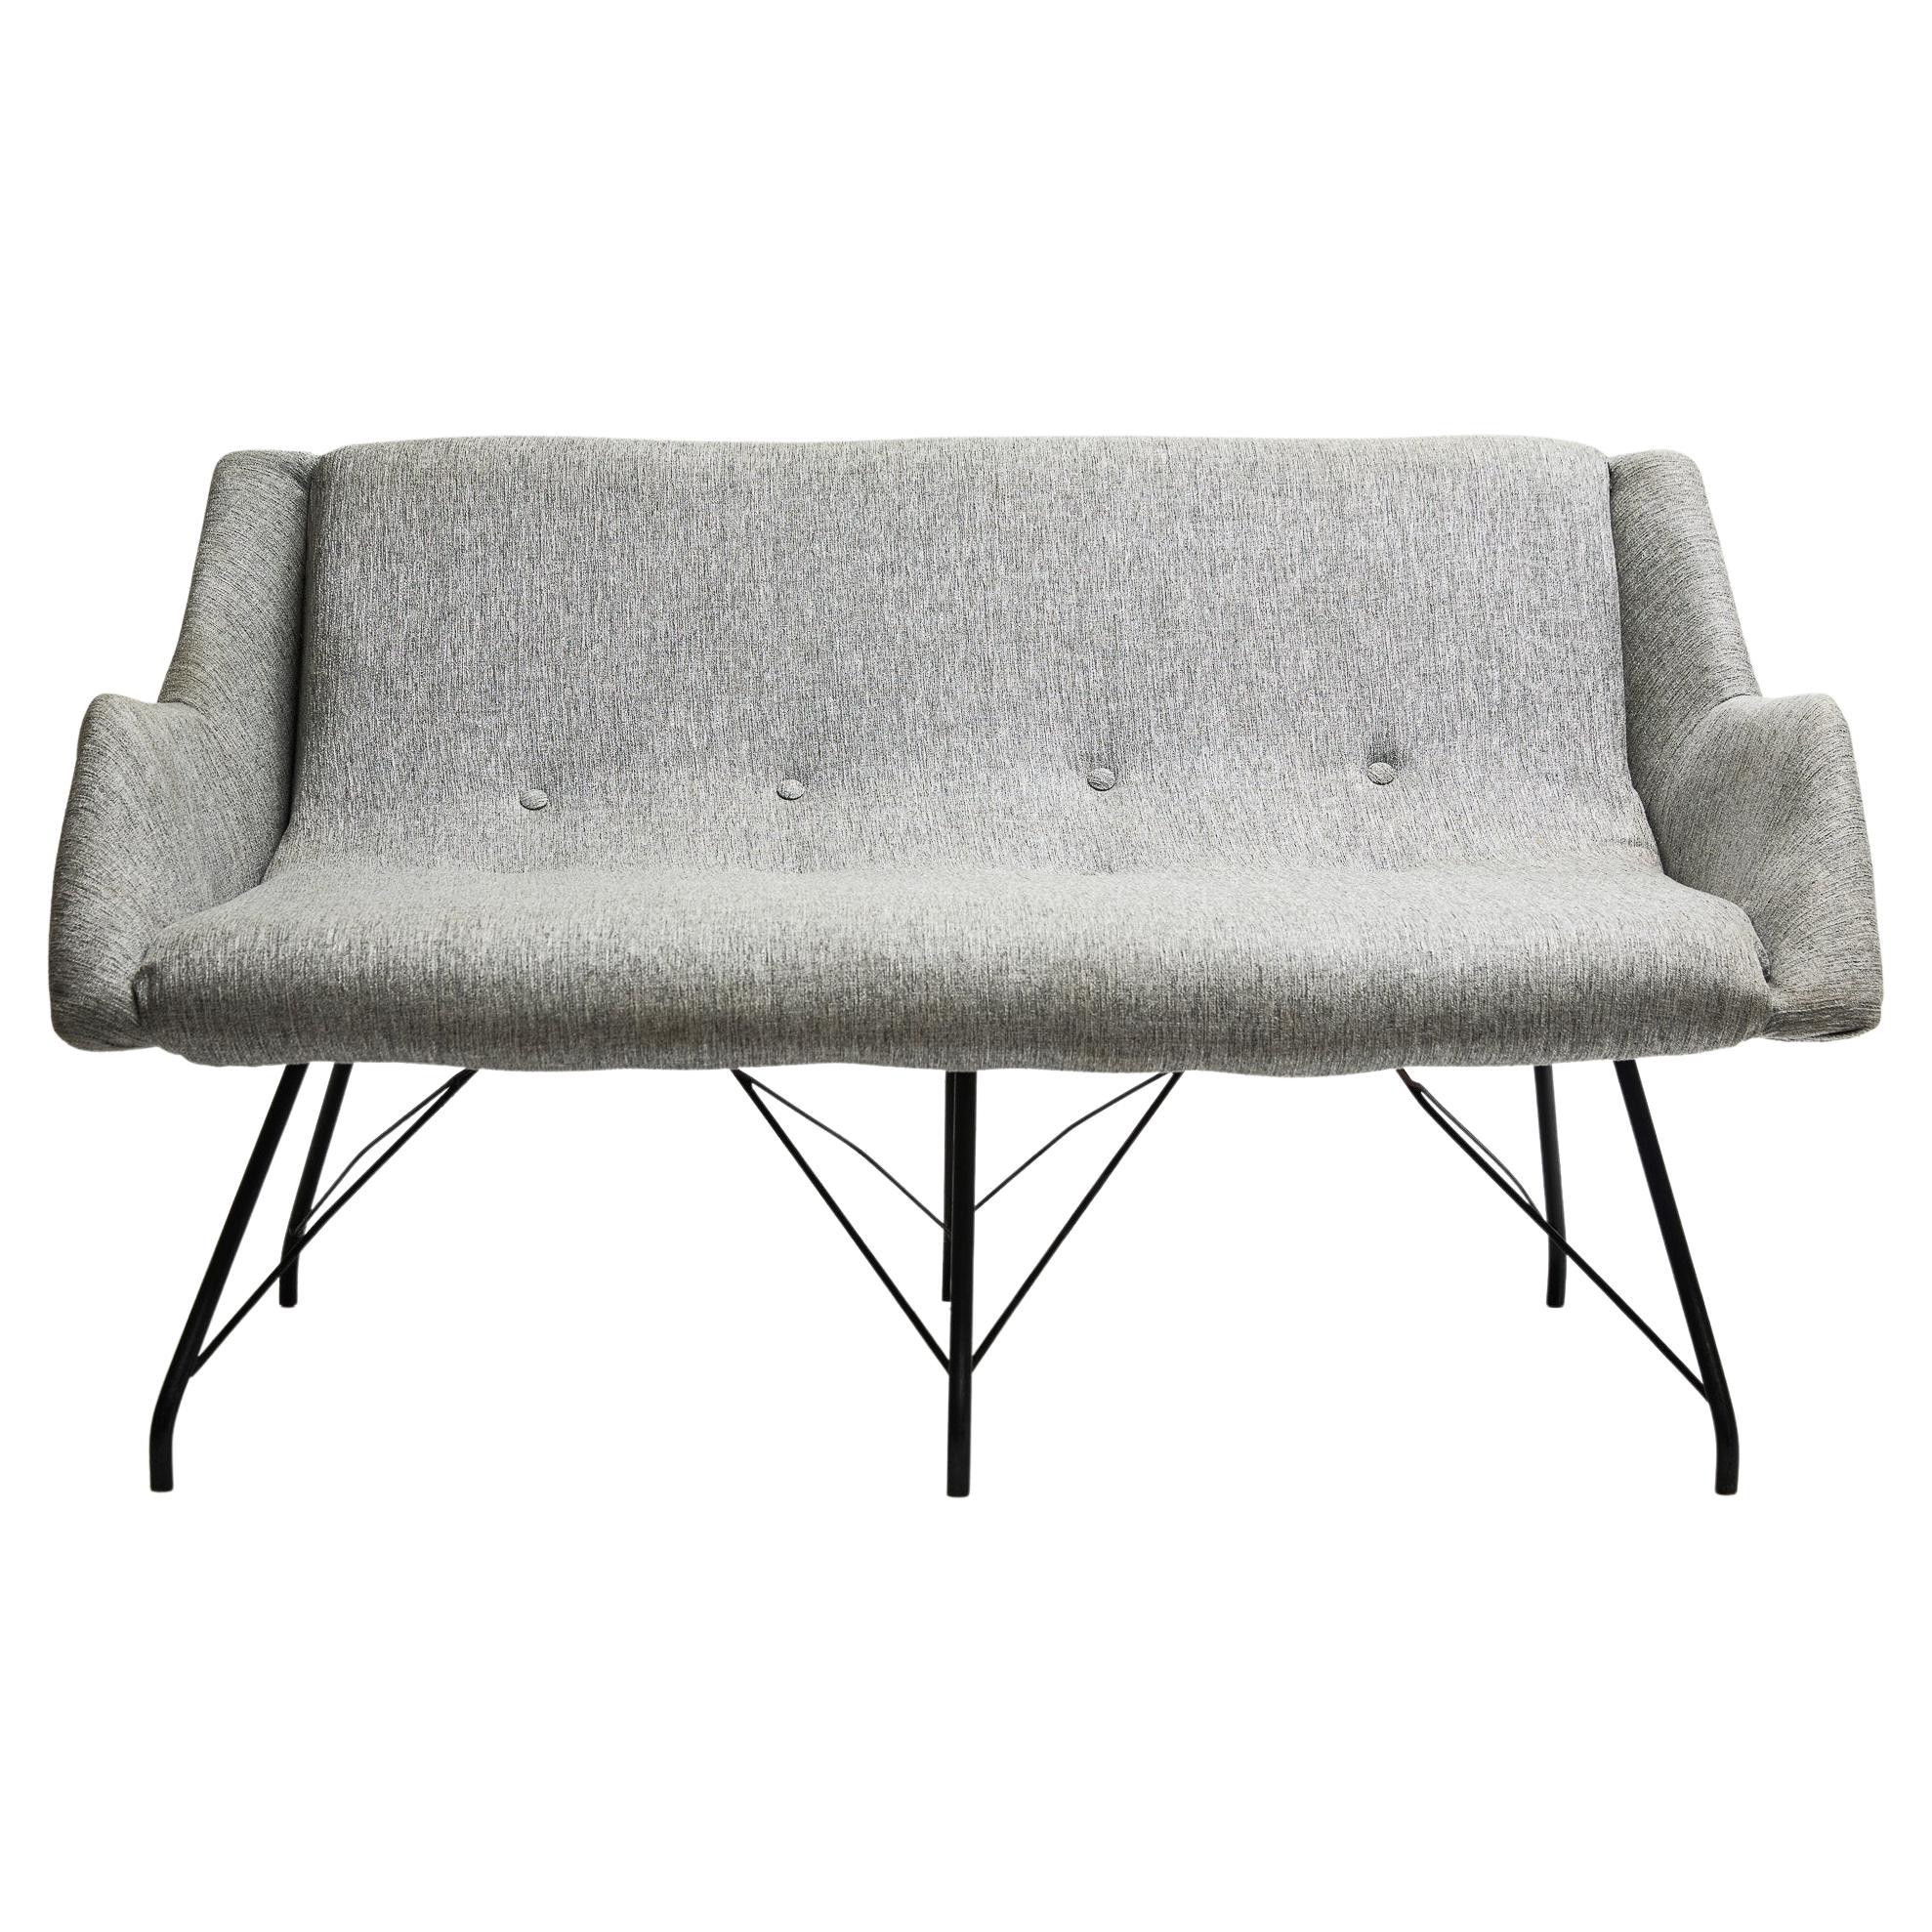 Available now, this Mid-Century Modern loveseat in grey cotton fabric & iron, was designed by Carlo Hauner and manufactured by Forma Moveis in Brazil 1955 and is a showstopper! The name of the model is “Concha” (“Shell” in Portuguese), as they